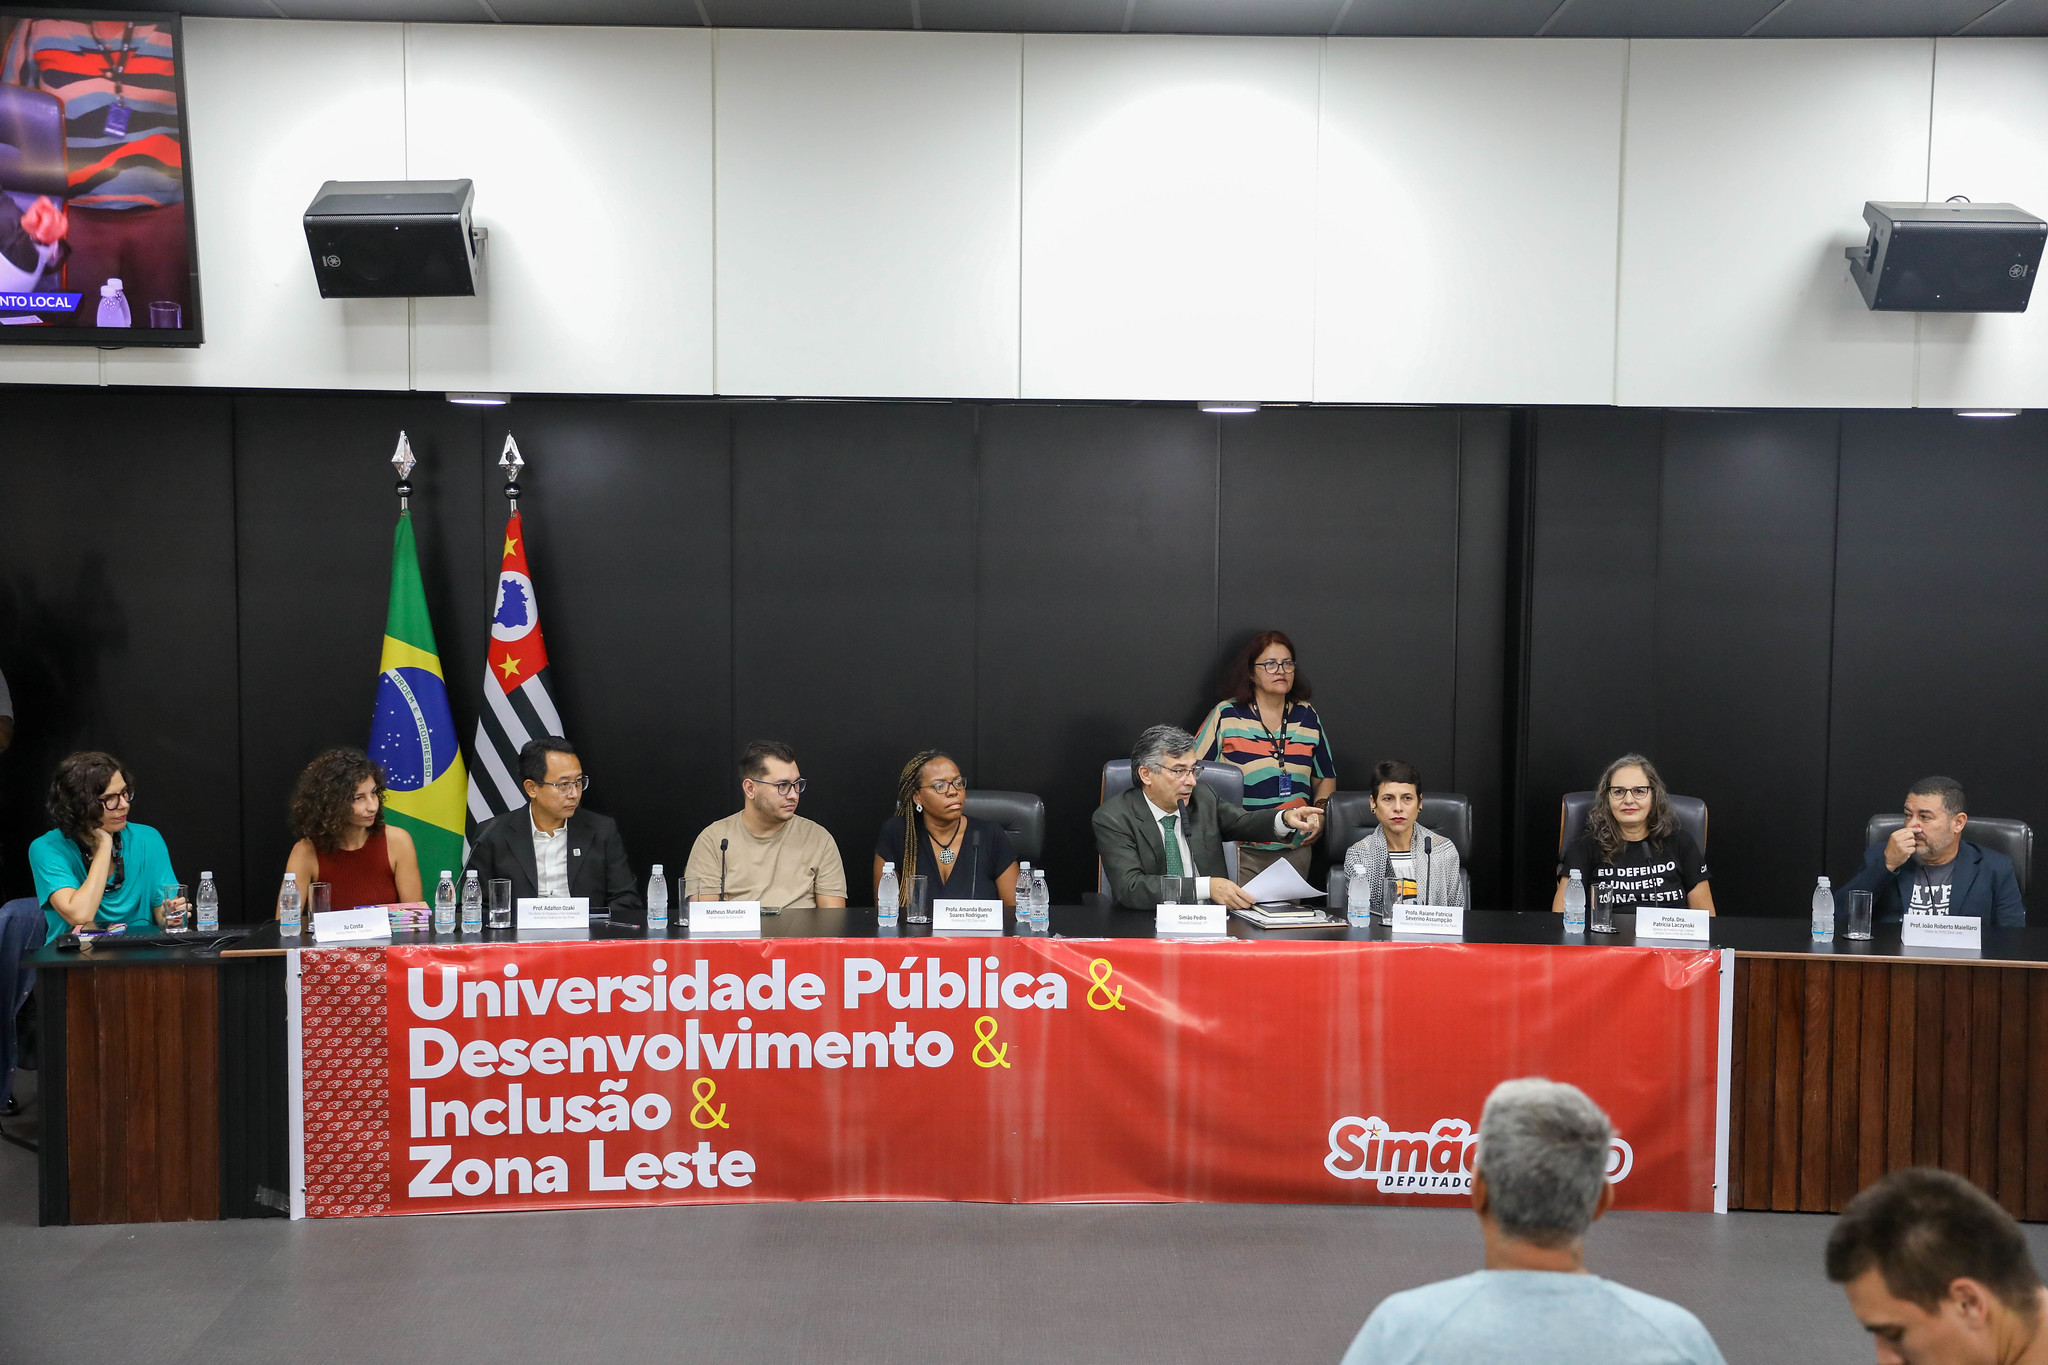 Educao na Zona Leste: oportunidades<a style='float:right' href='https://www3.al.sp.gov.br/repositorio/noticia/N-04-2024/fg323042.jpg' target=_blank><img src='/_img/material-file-download-white.png' width='14px' alt='Clique para baixar a imagem'></a>